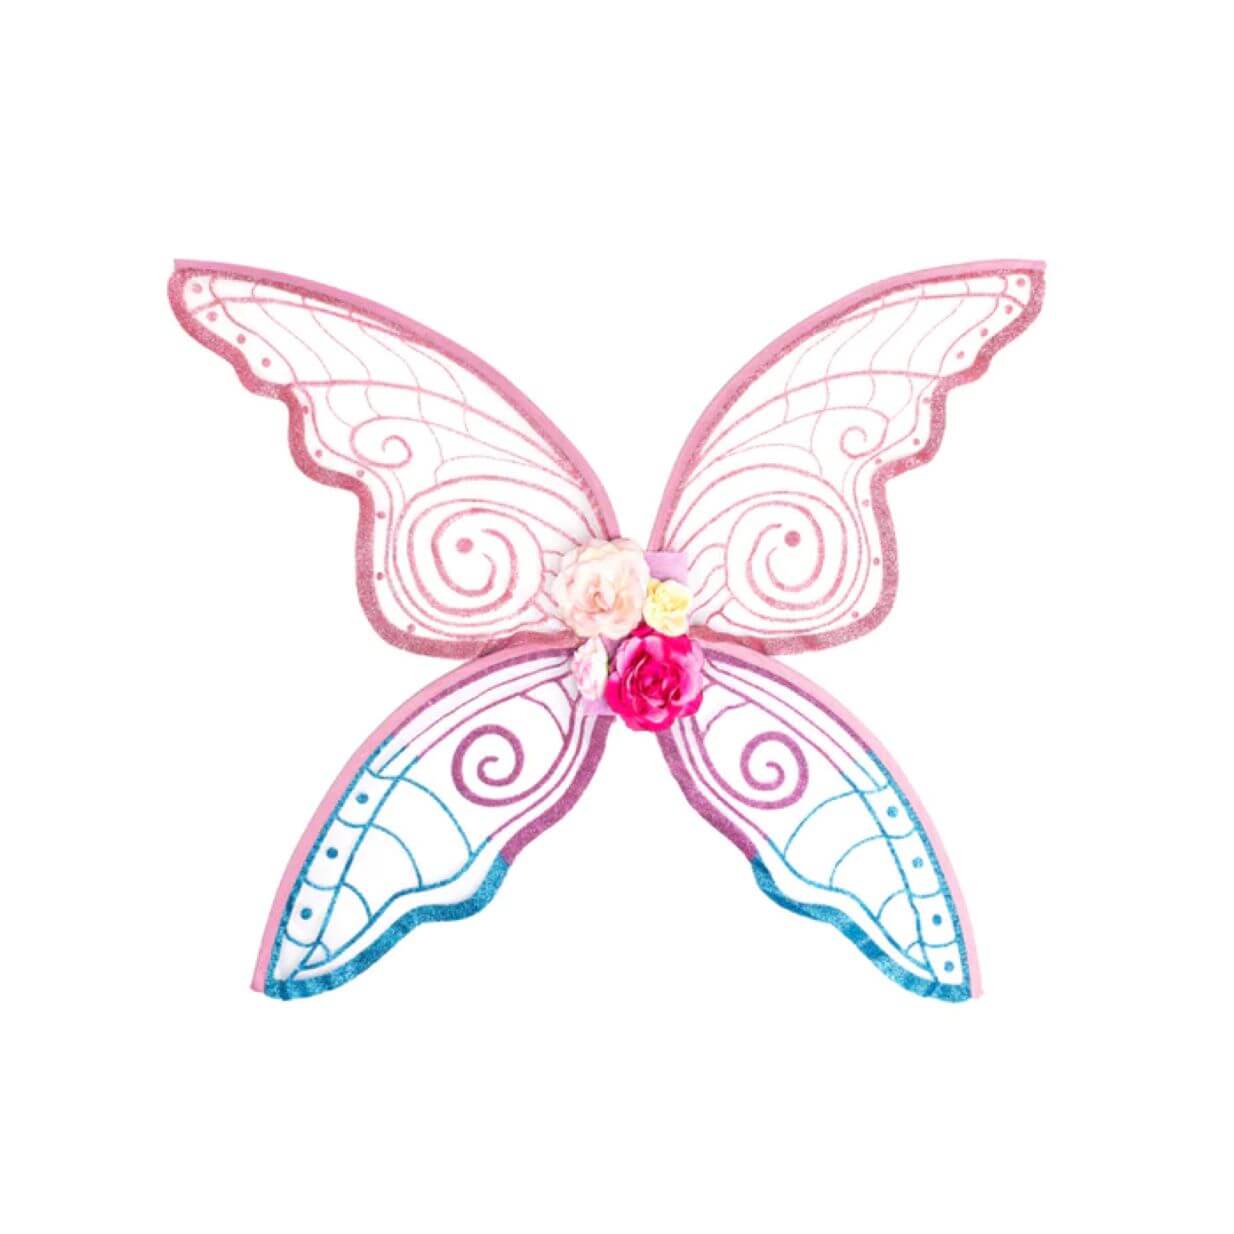 pink and blue glitter fairy wings styled like butterfly wings with pink fabric flower adornments